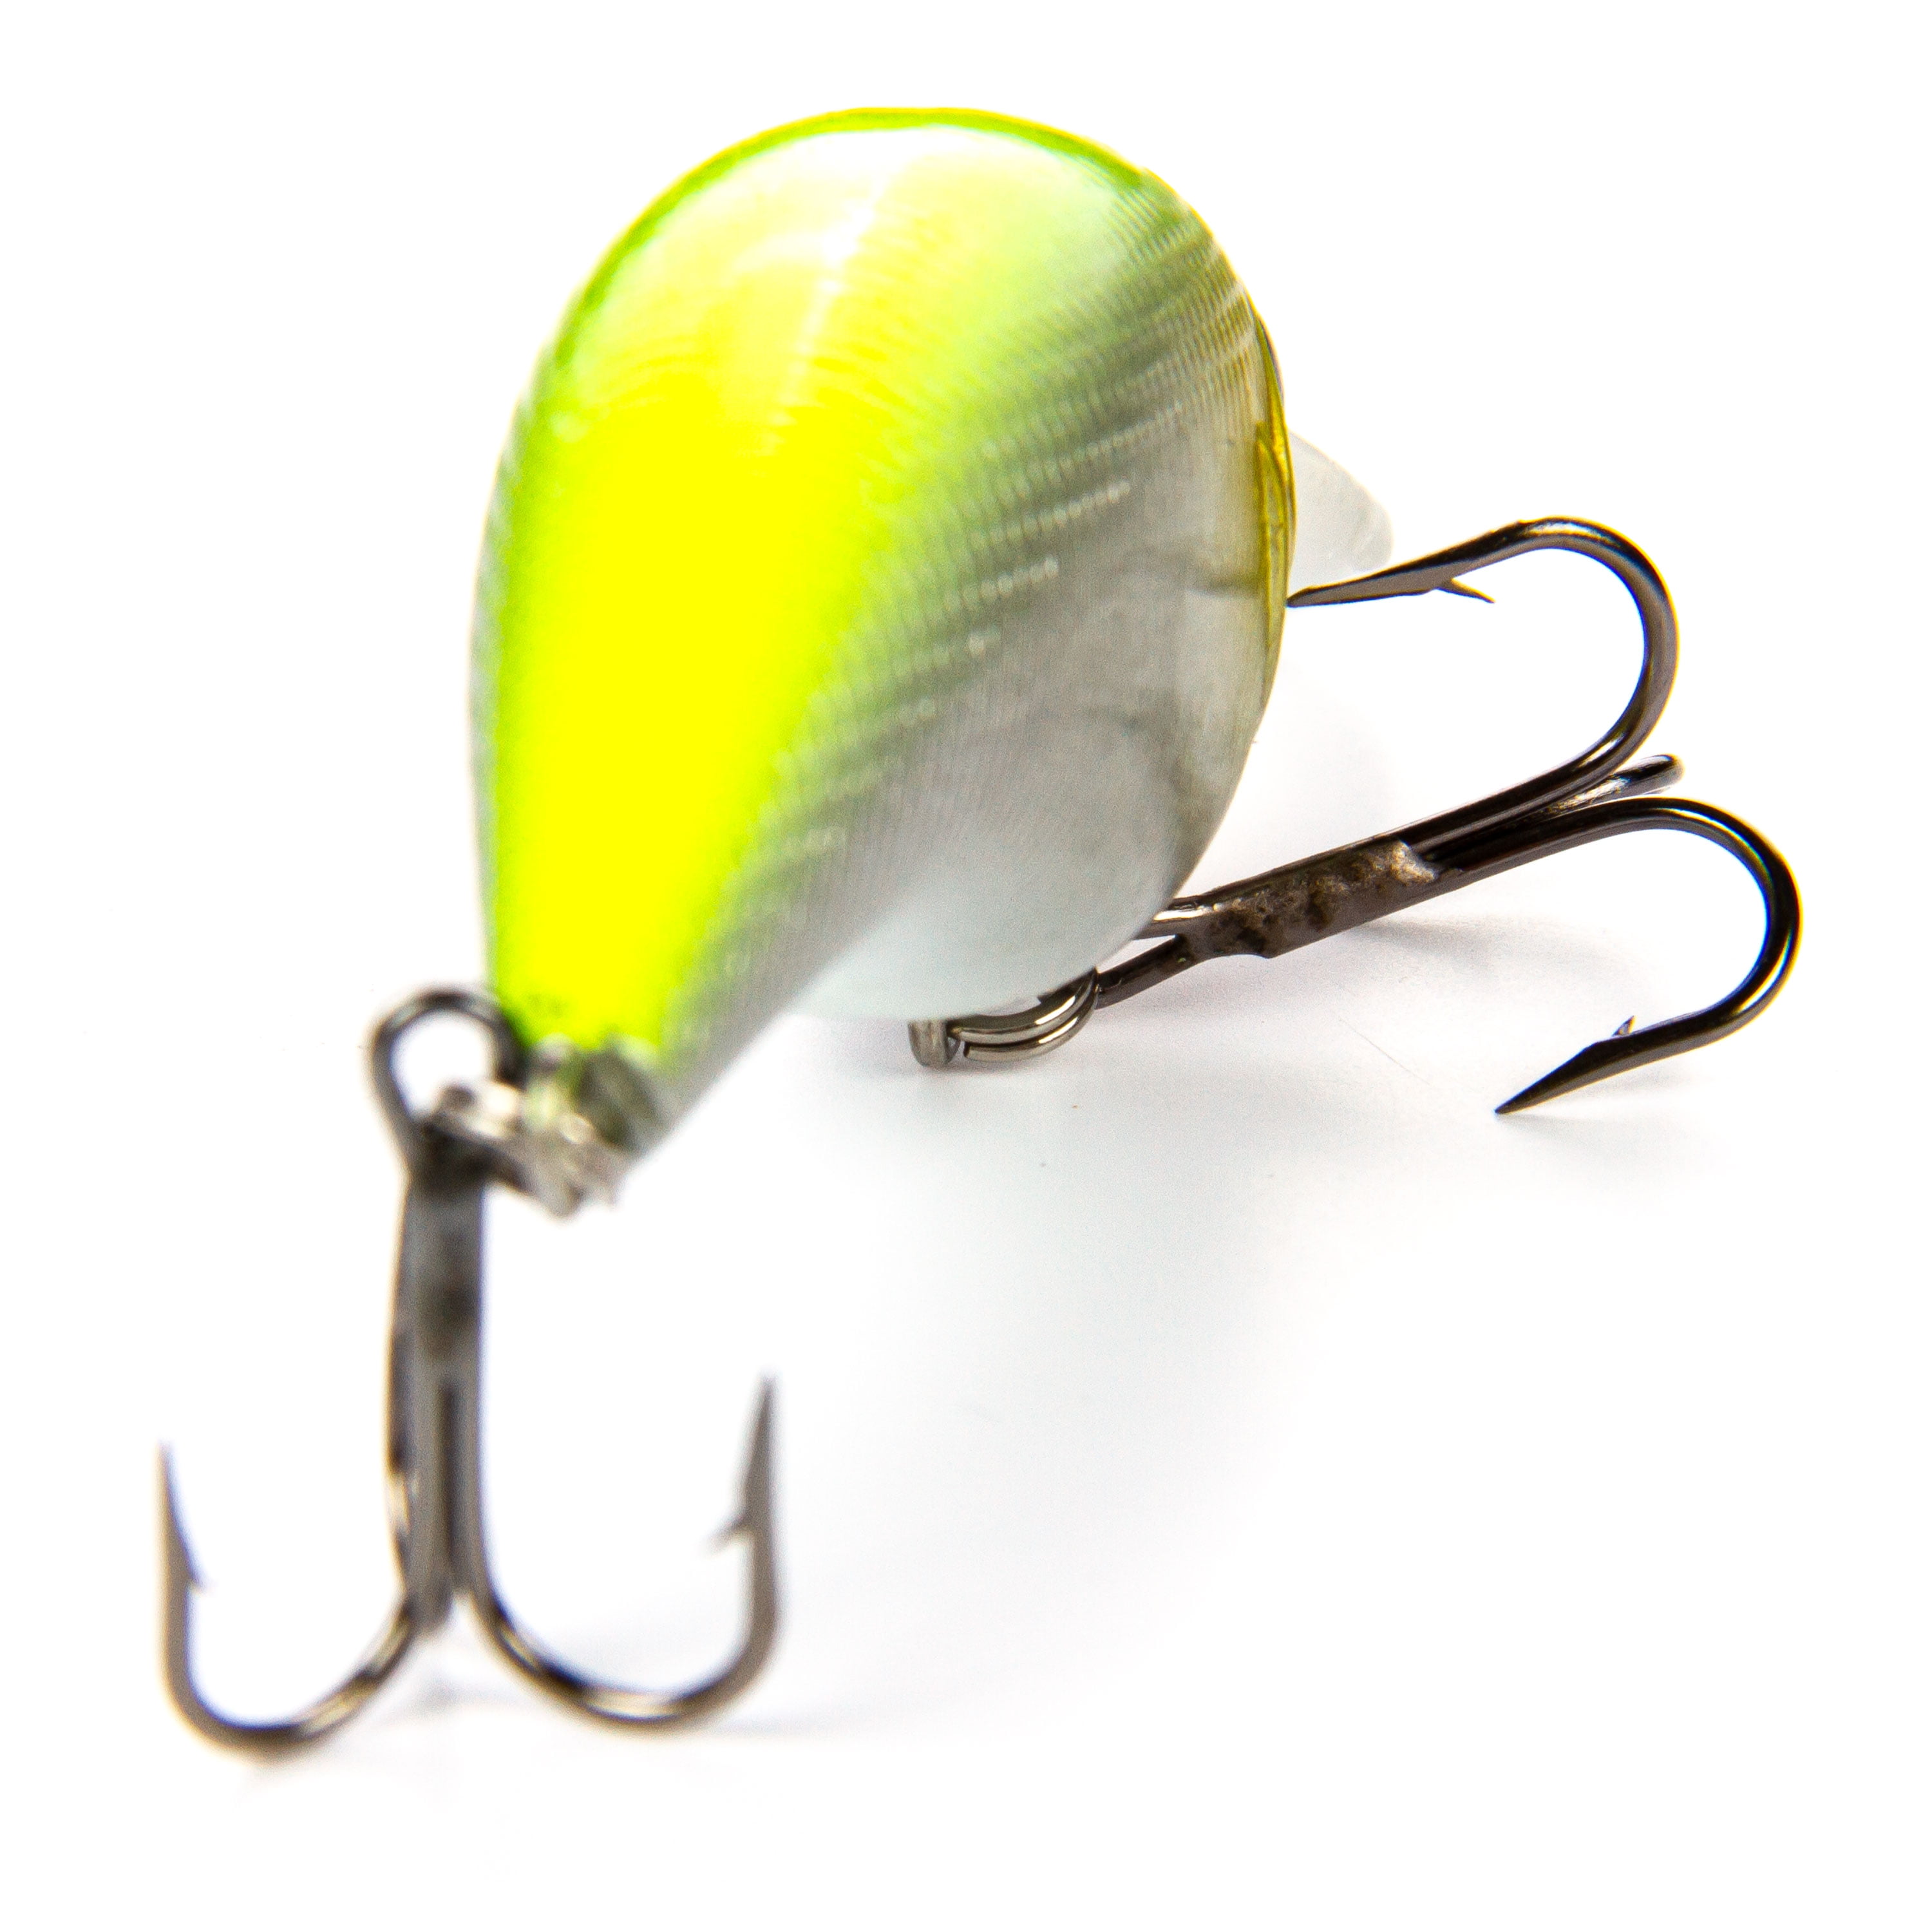 Slim Craw Crankbait Fishing Lure - Chartreuse Rootbeer Sticker for Sale by  BlueSkyTheory